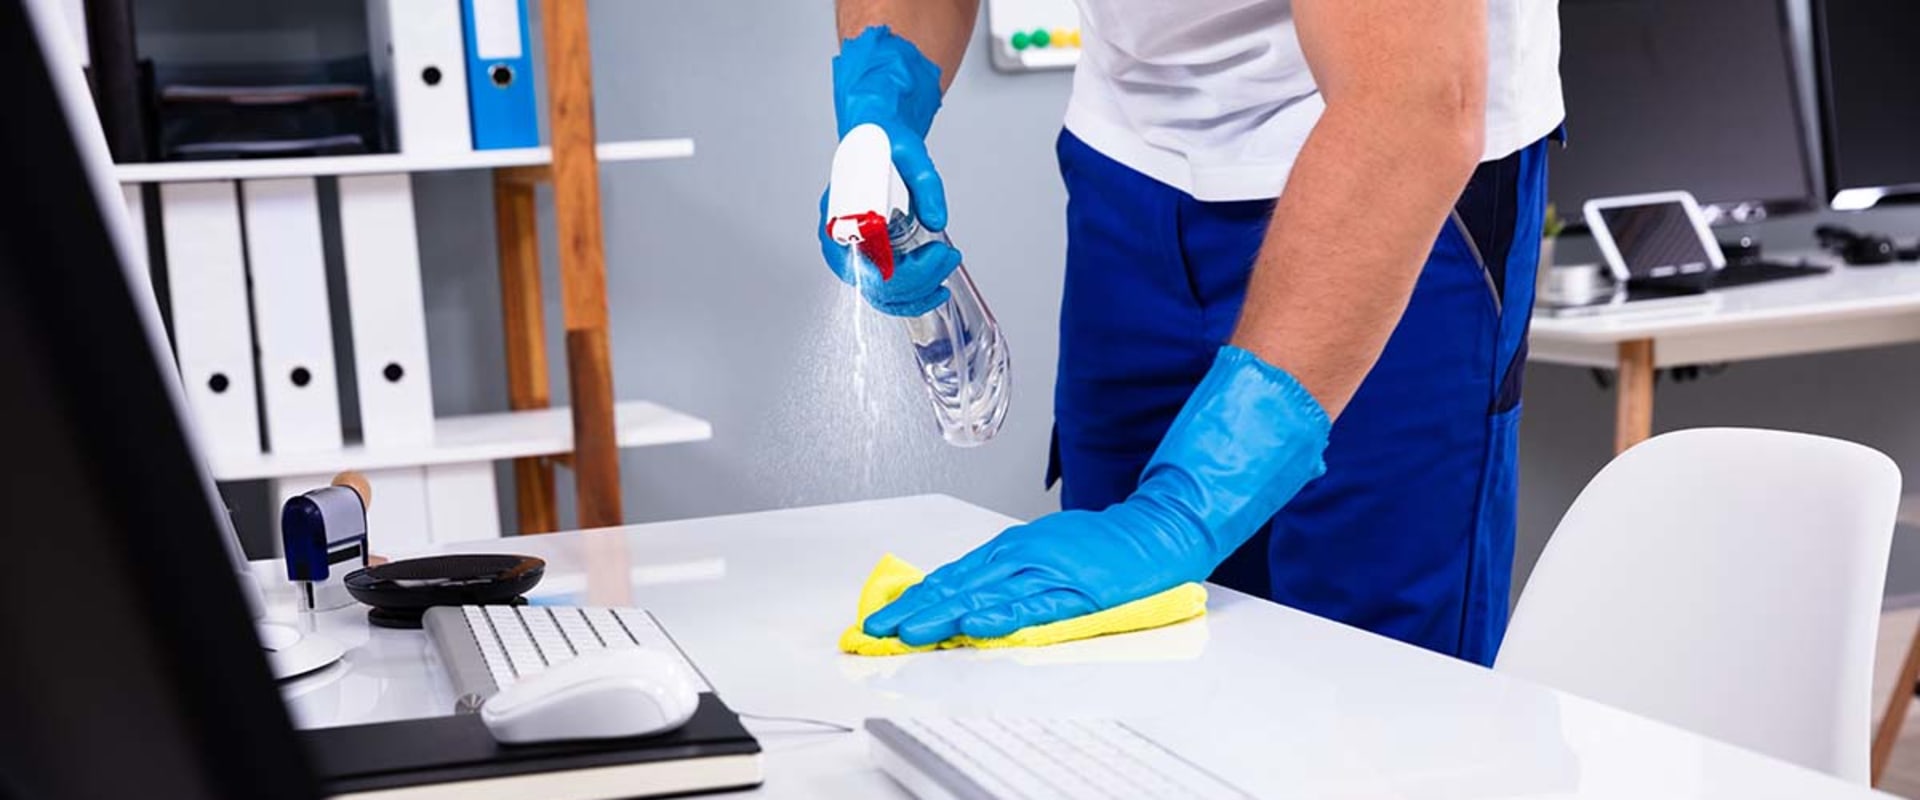 What type of expense is cleaning service?